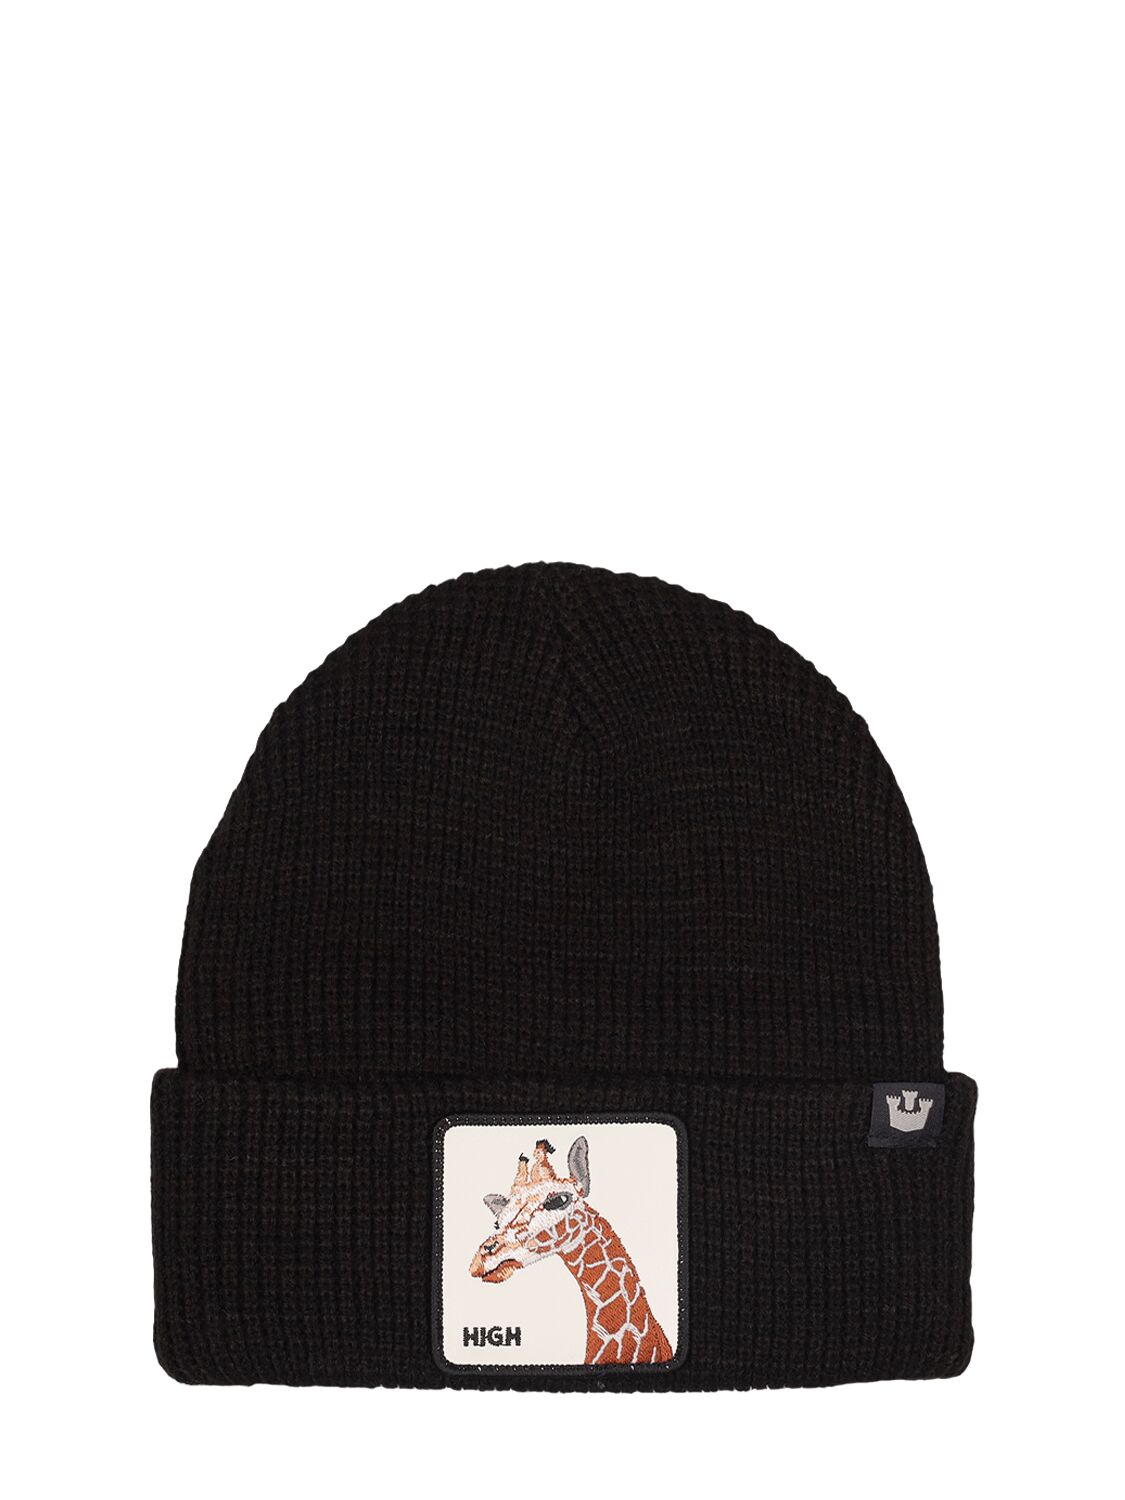 Up There Knit Beanie